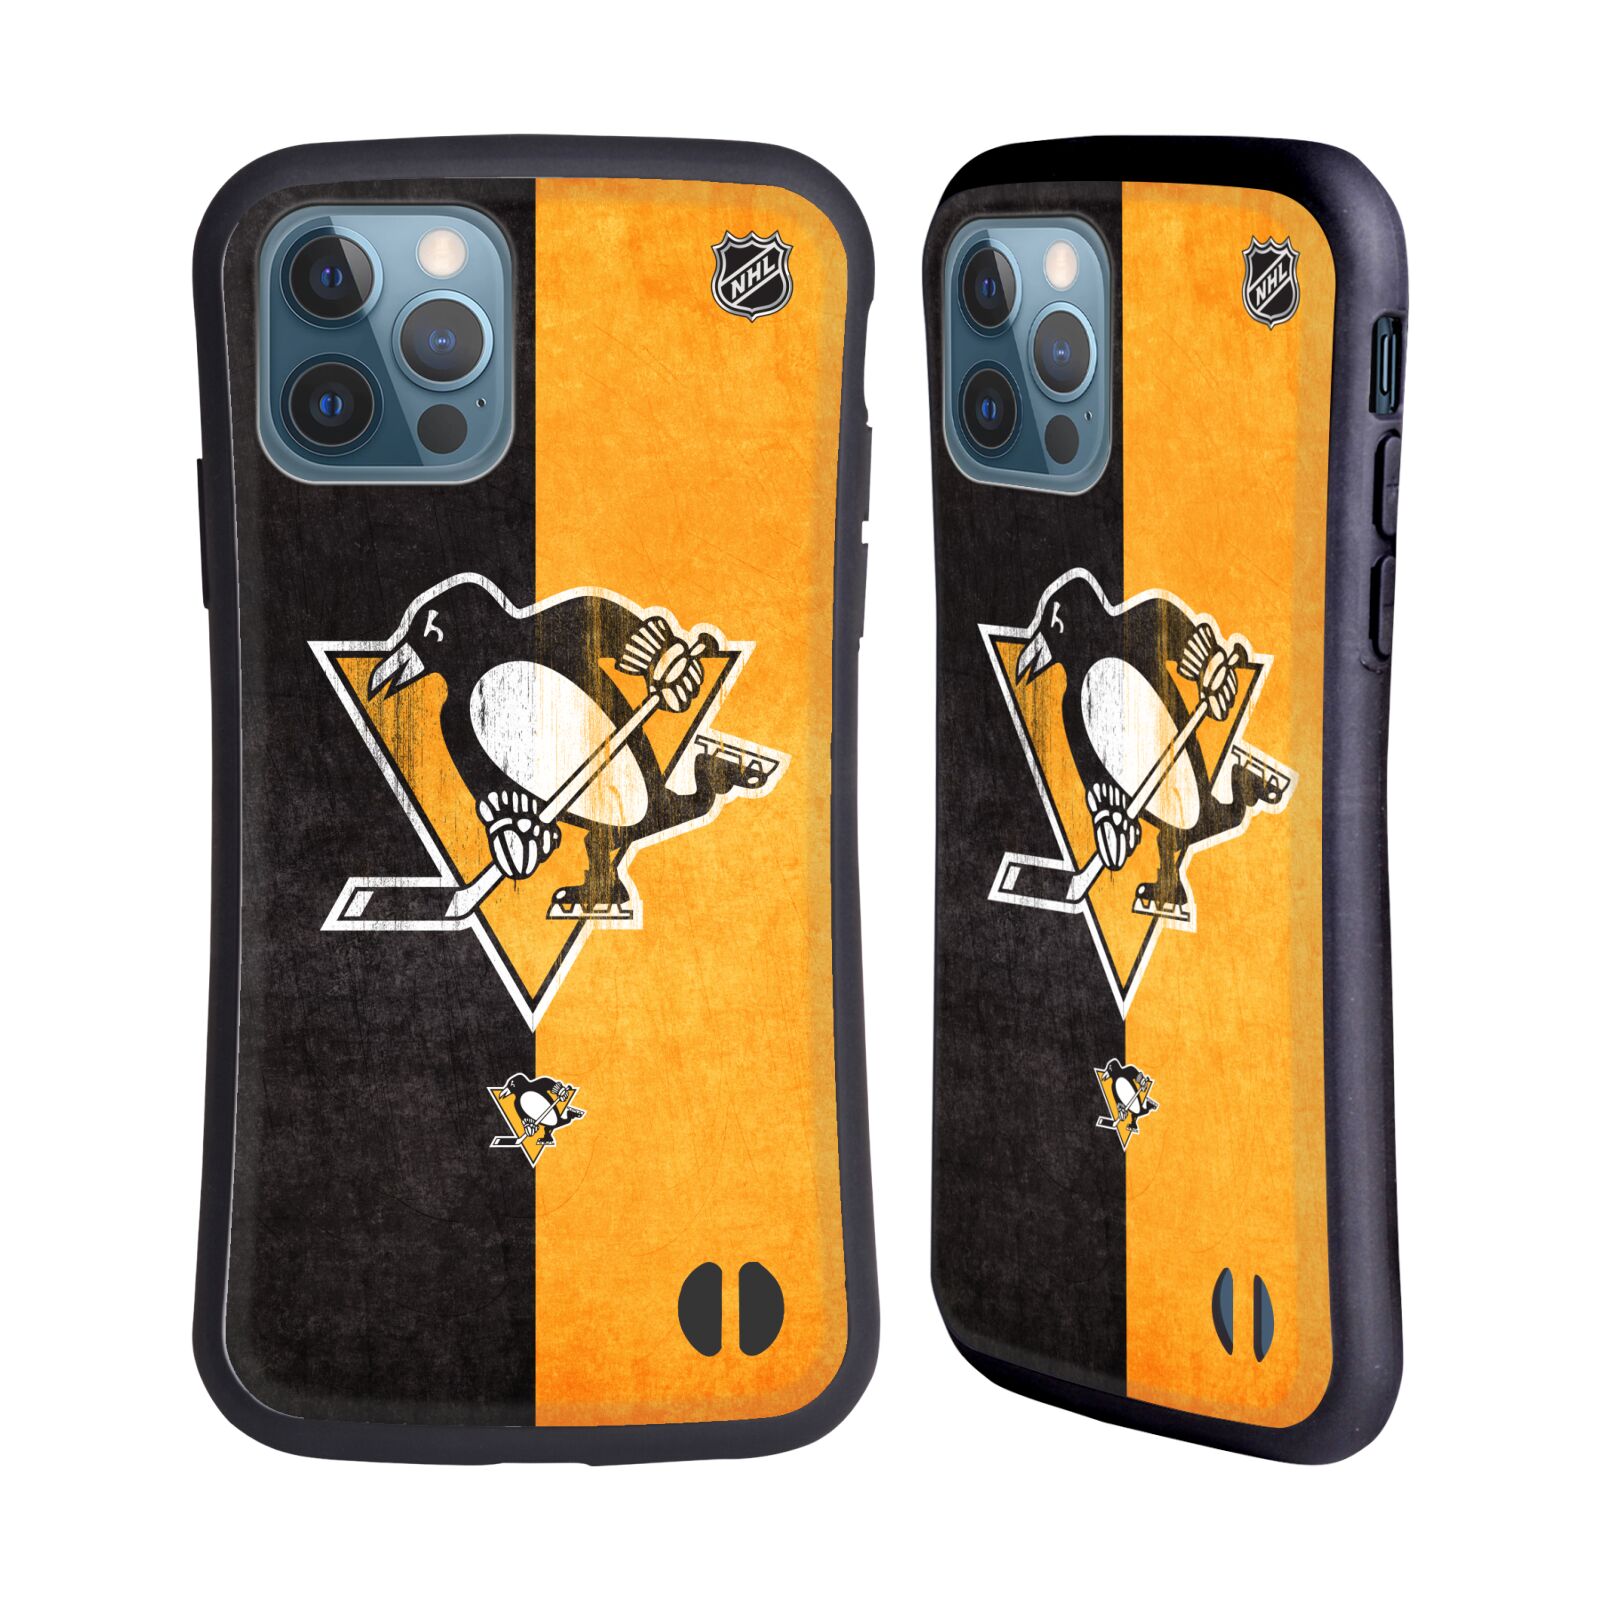 Obal na mobil Apple iPhone 12 / 12 PRO - HEAD CASE - NHL - pruhy logo Pittsburgh Penguins